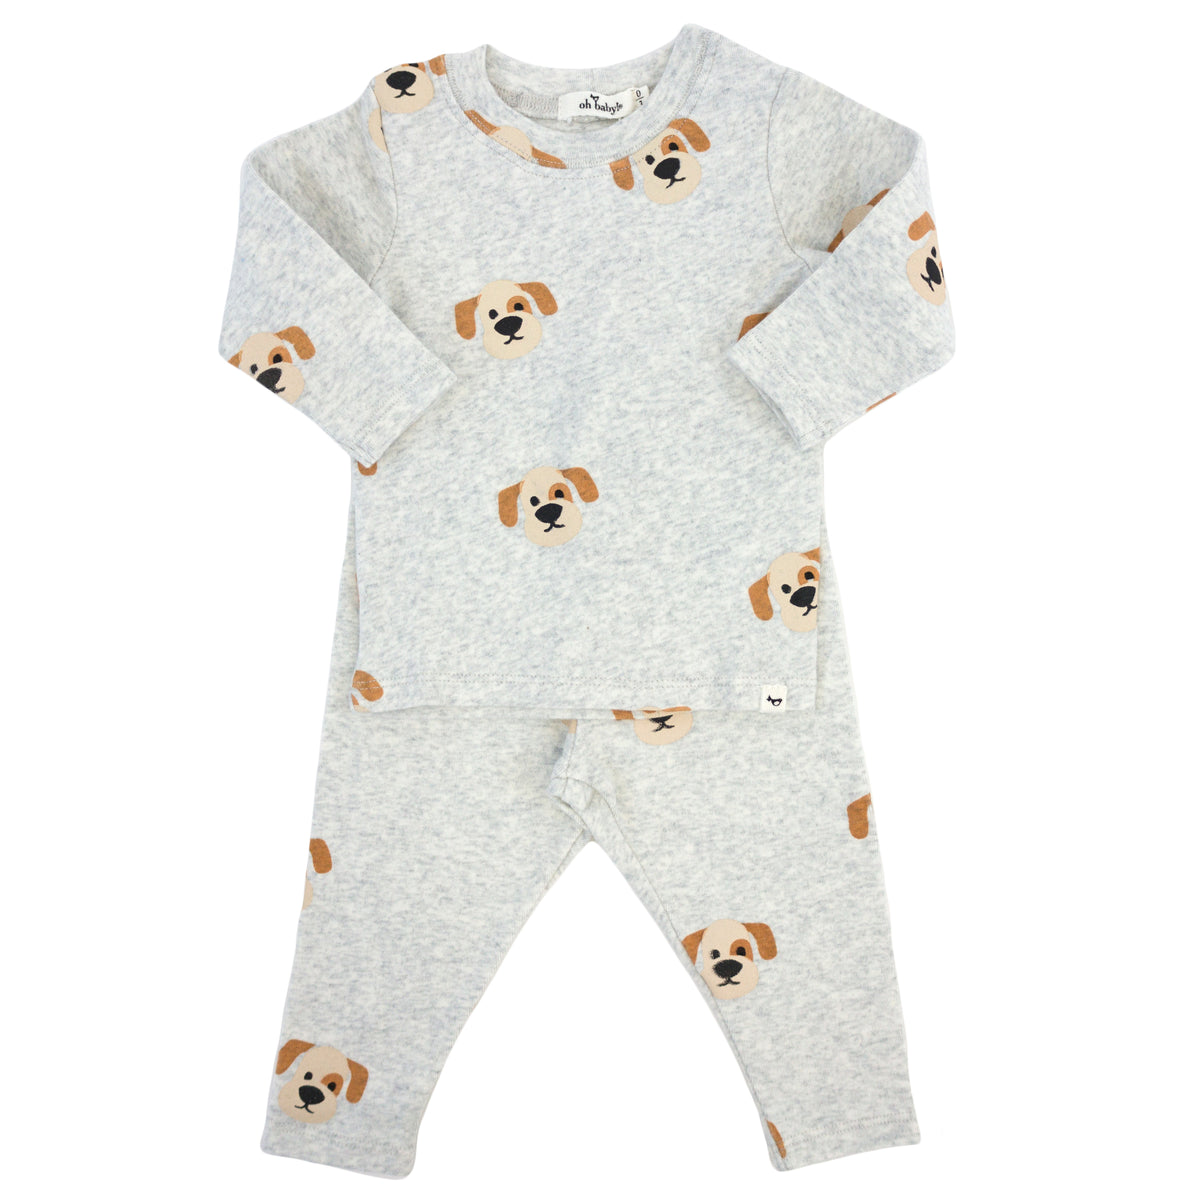 oh baby! Two Piece Set - Puppy Face Print - Heather Gray